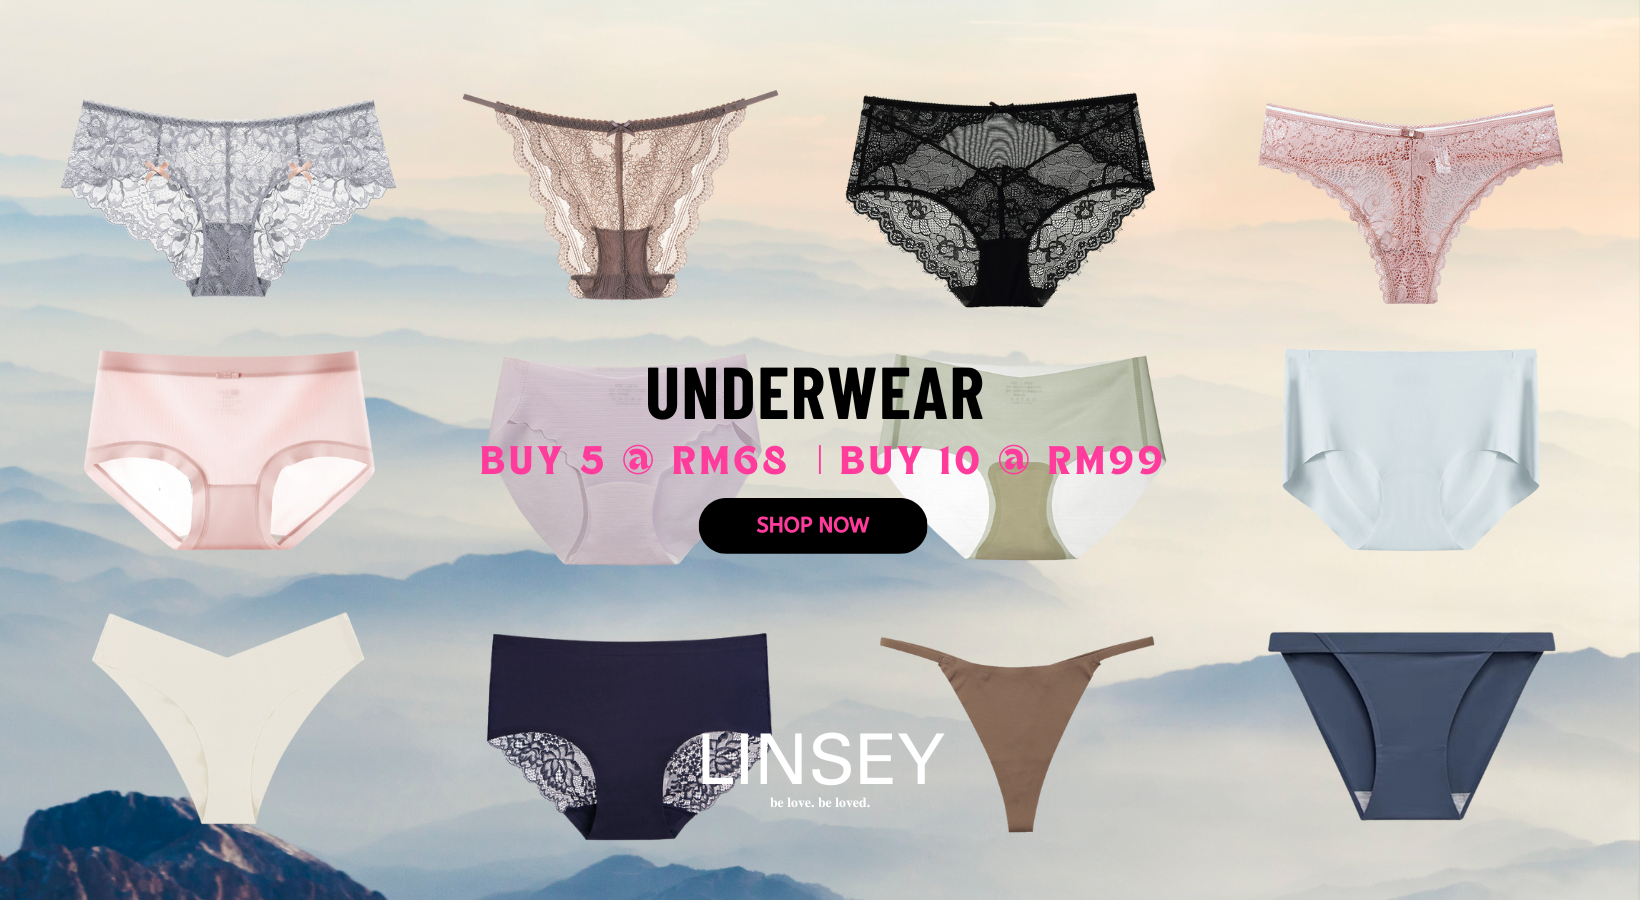 LINSEY - Online Woman's Fashion Store